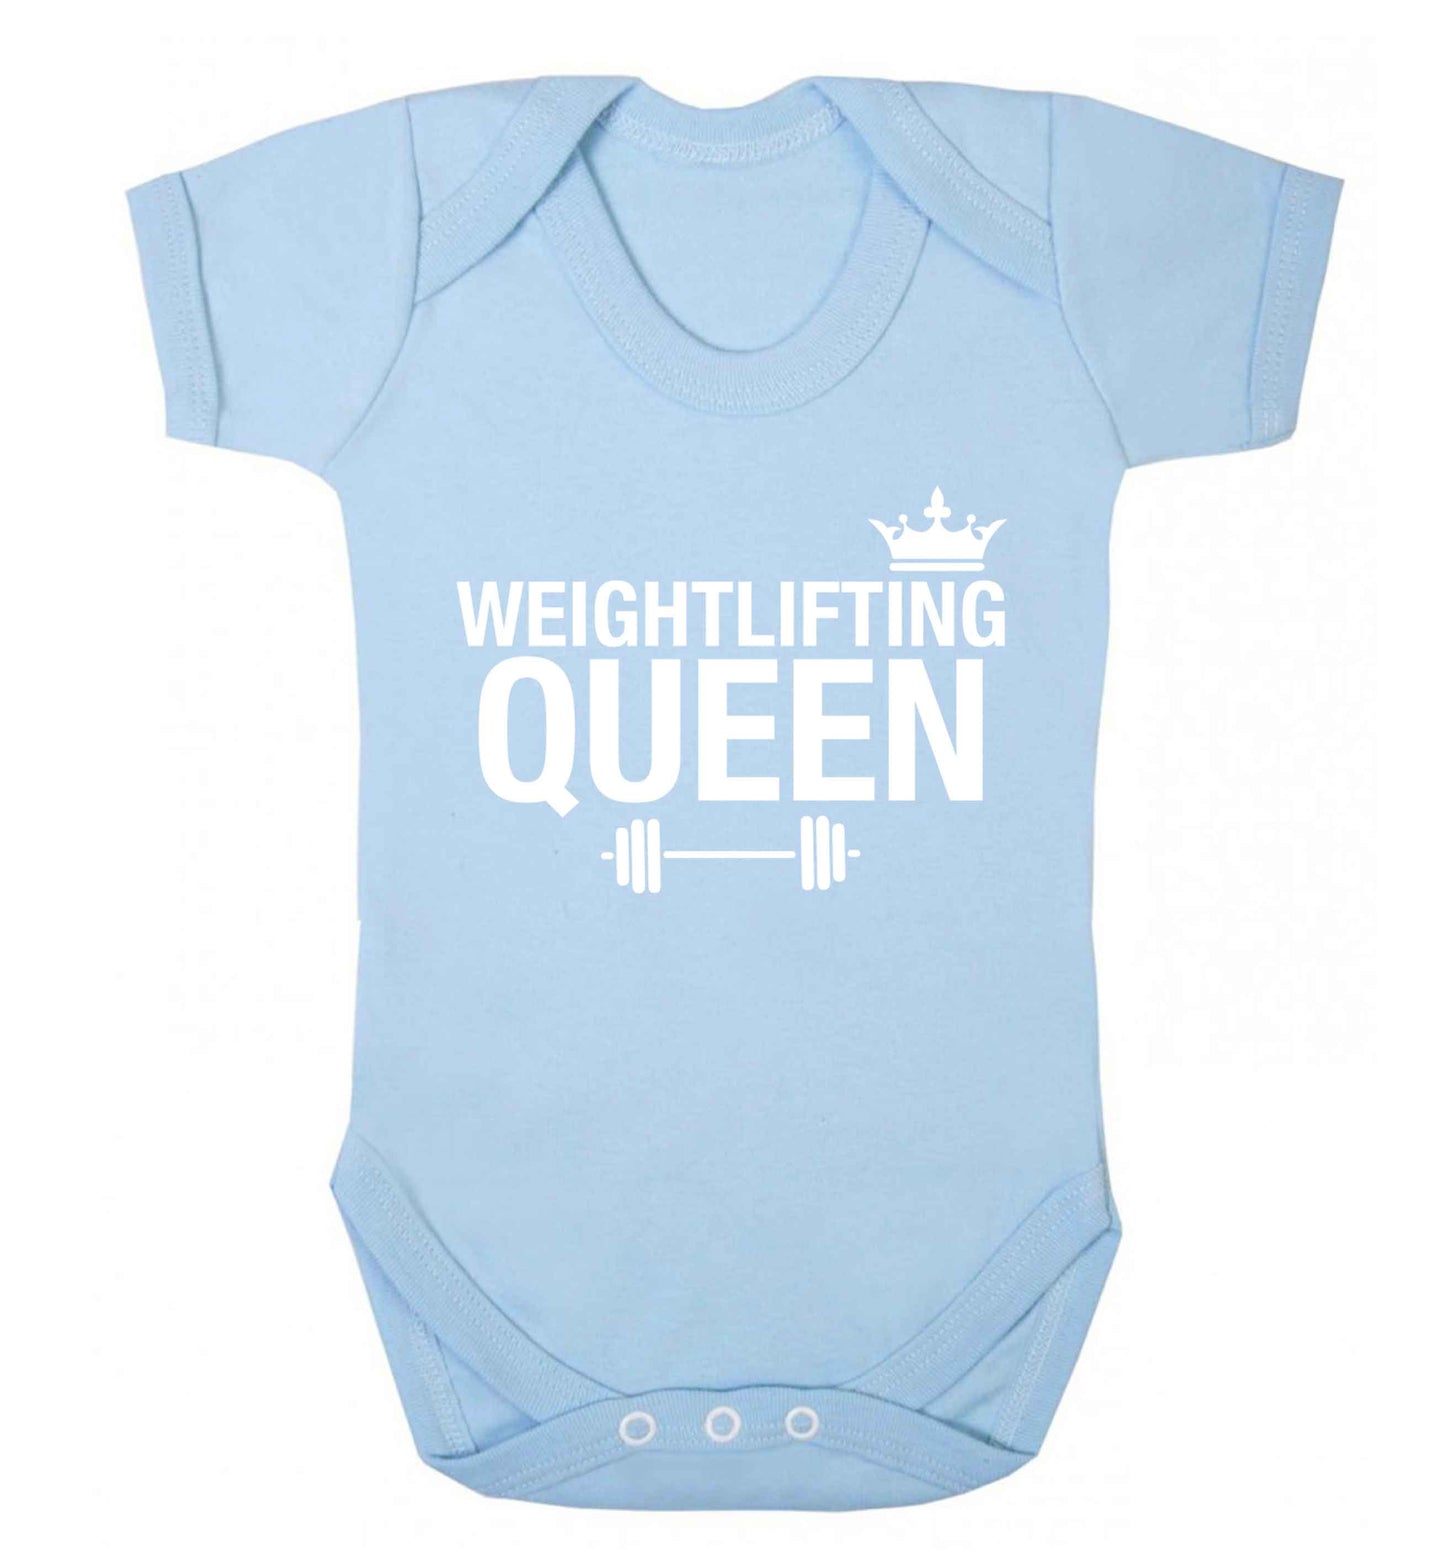 Weightlifting Queen Baby Vest pale blue 18-24 months